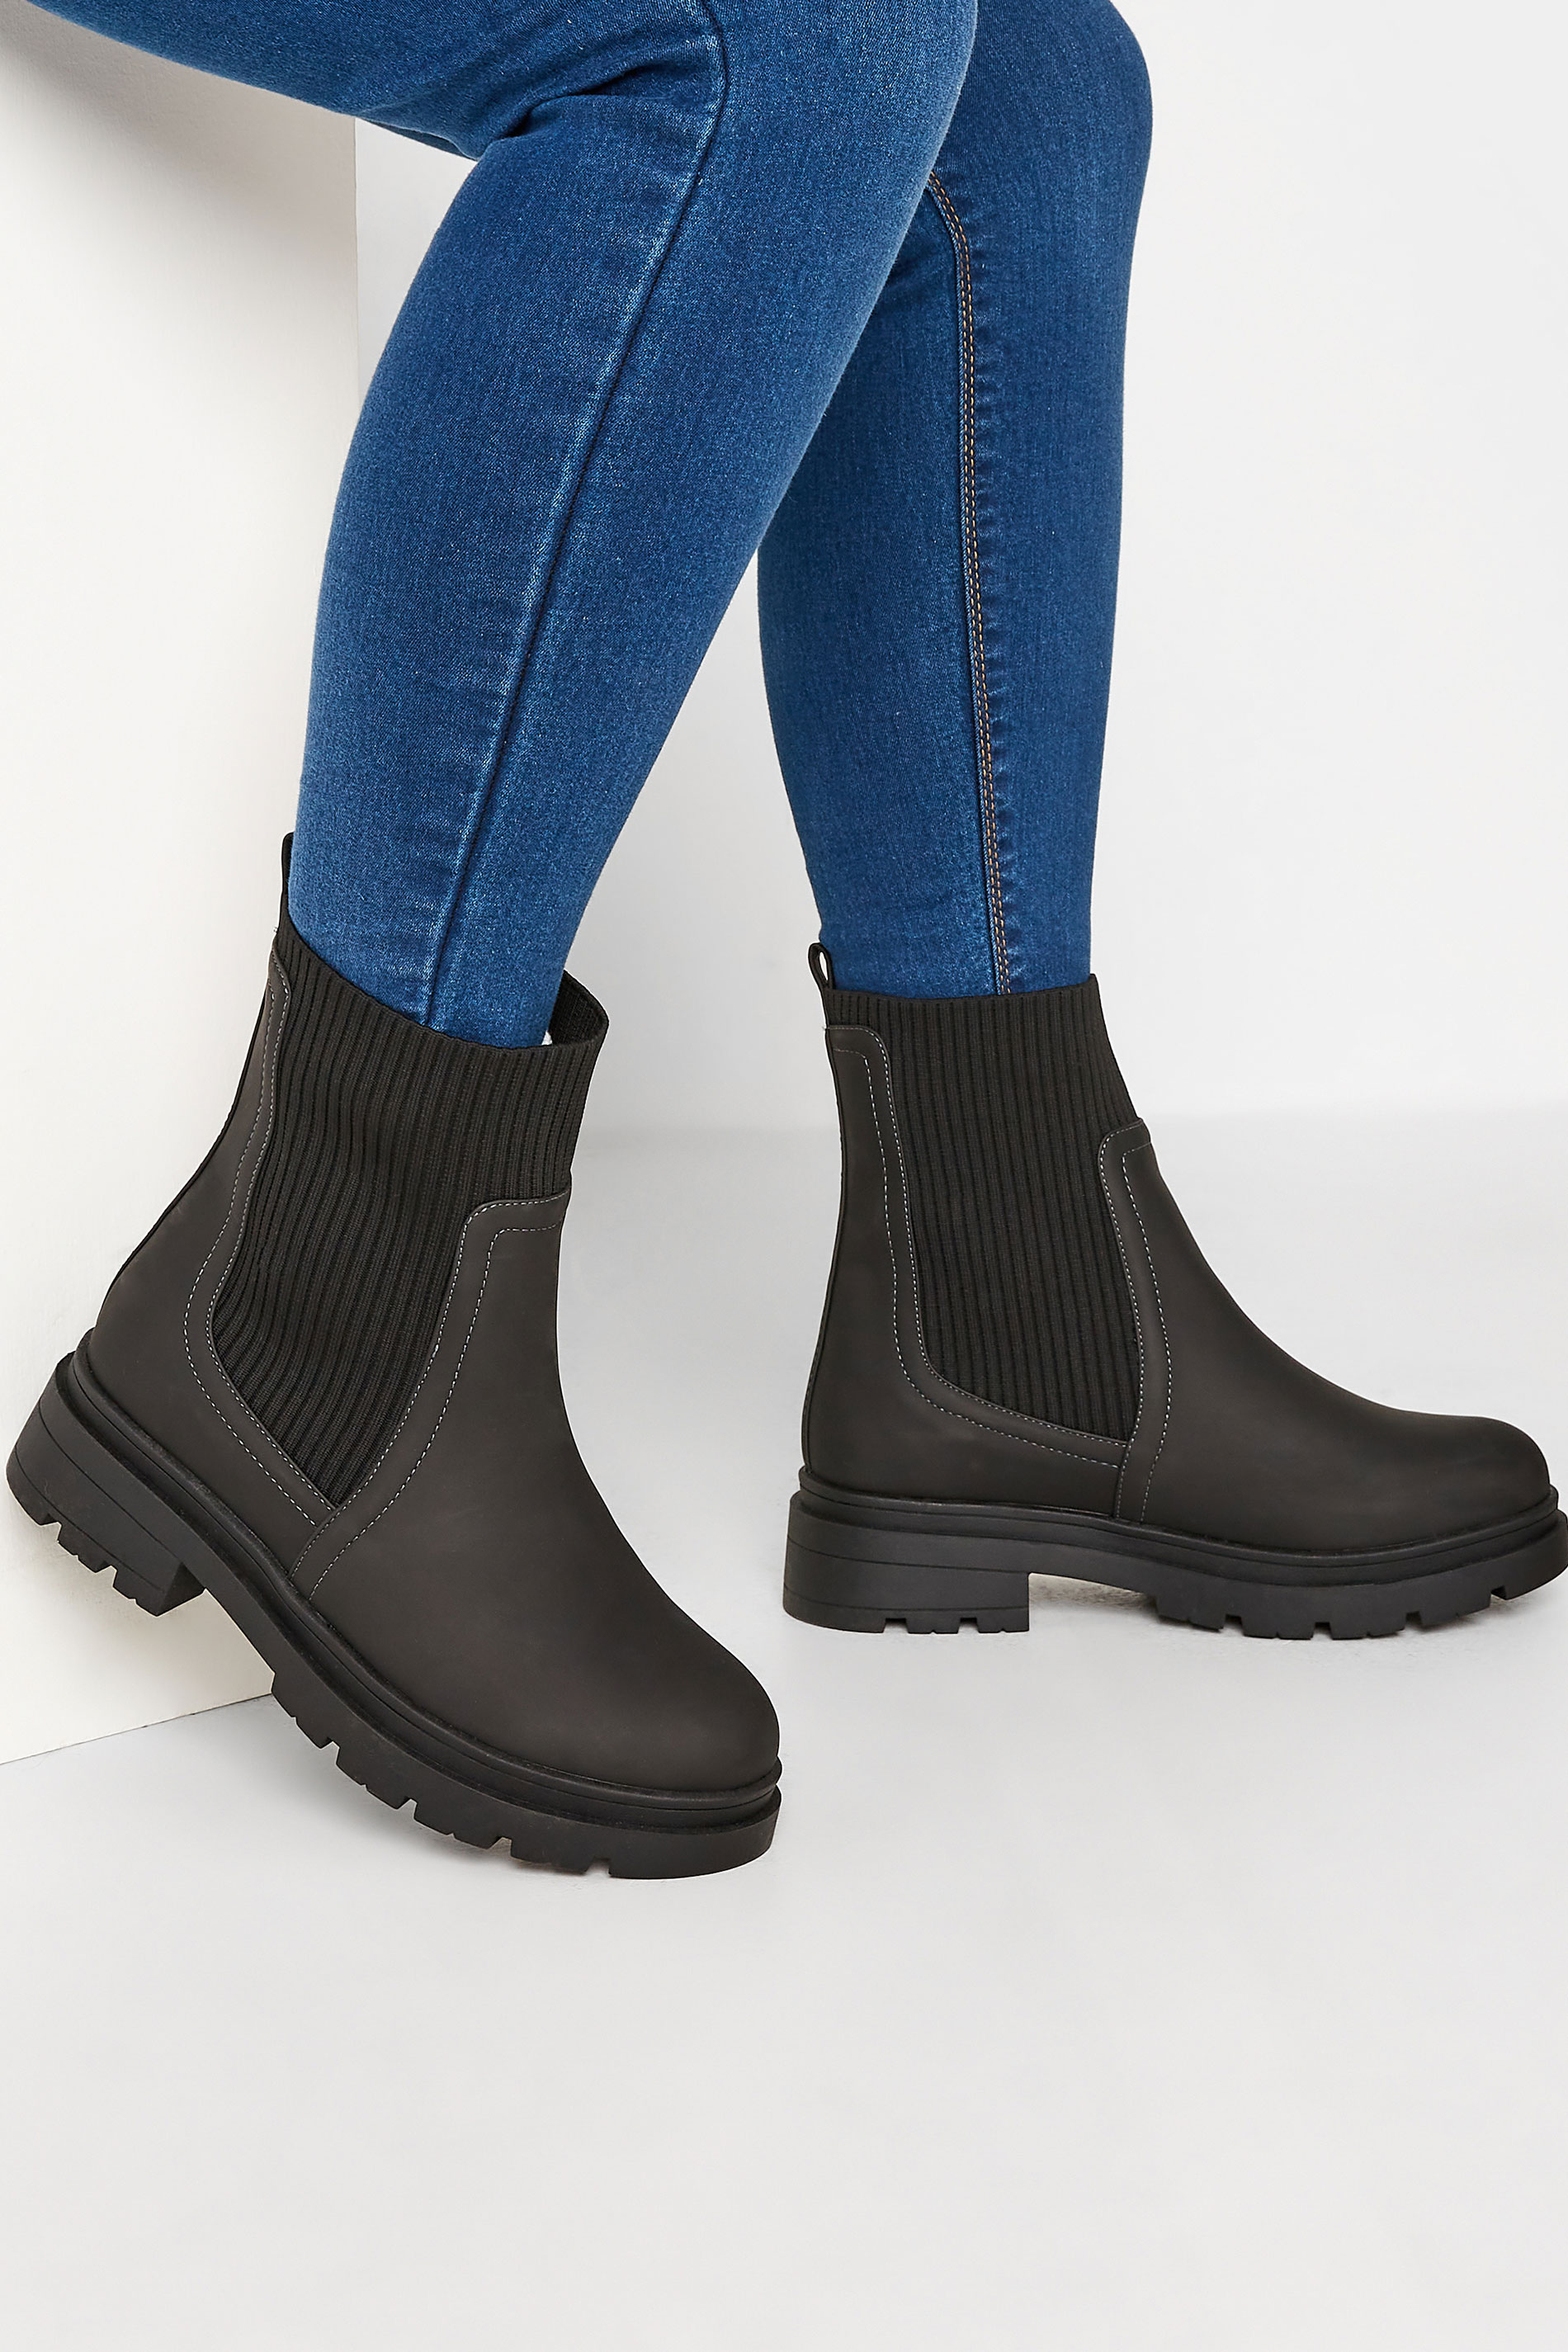 LIMITED COLLECTION Black Sock Chelsea Boots In Extra Wide EEE Fit 1